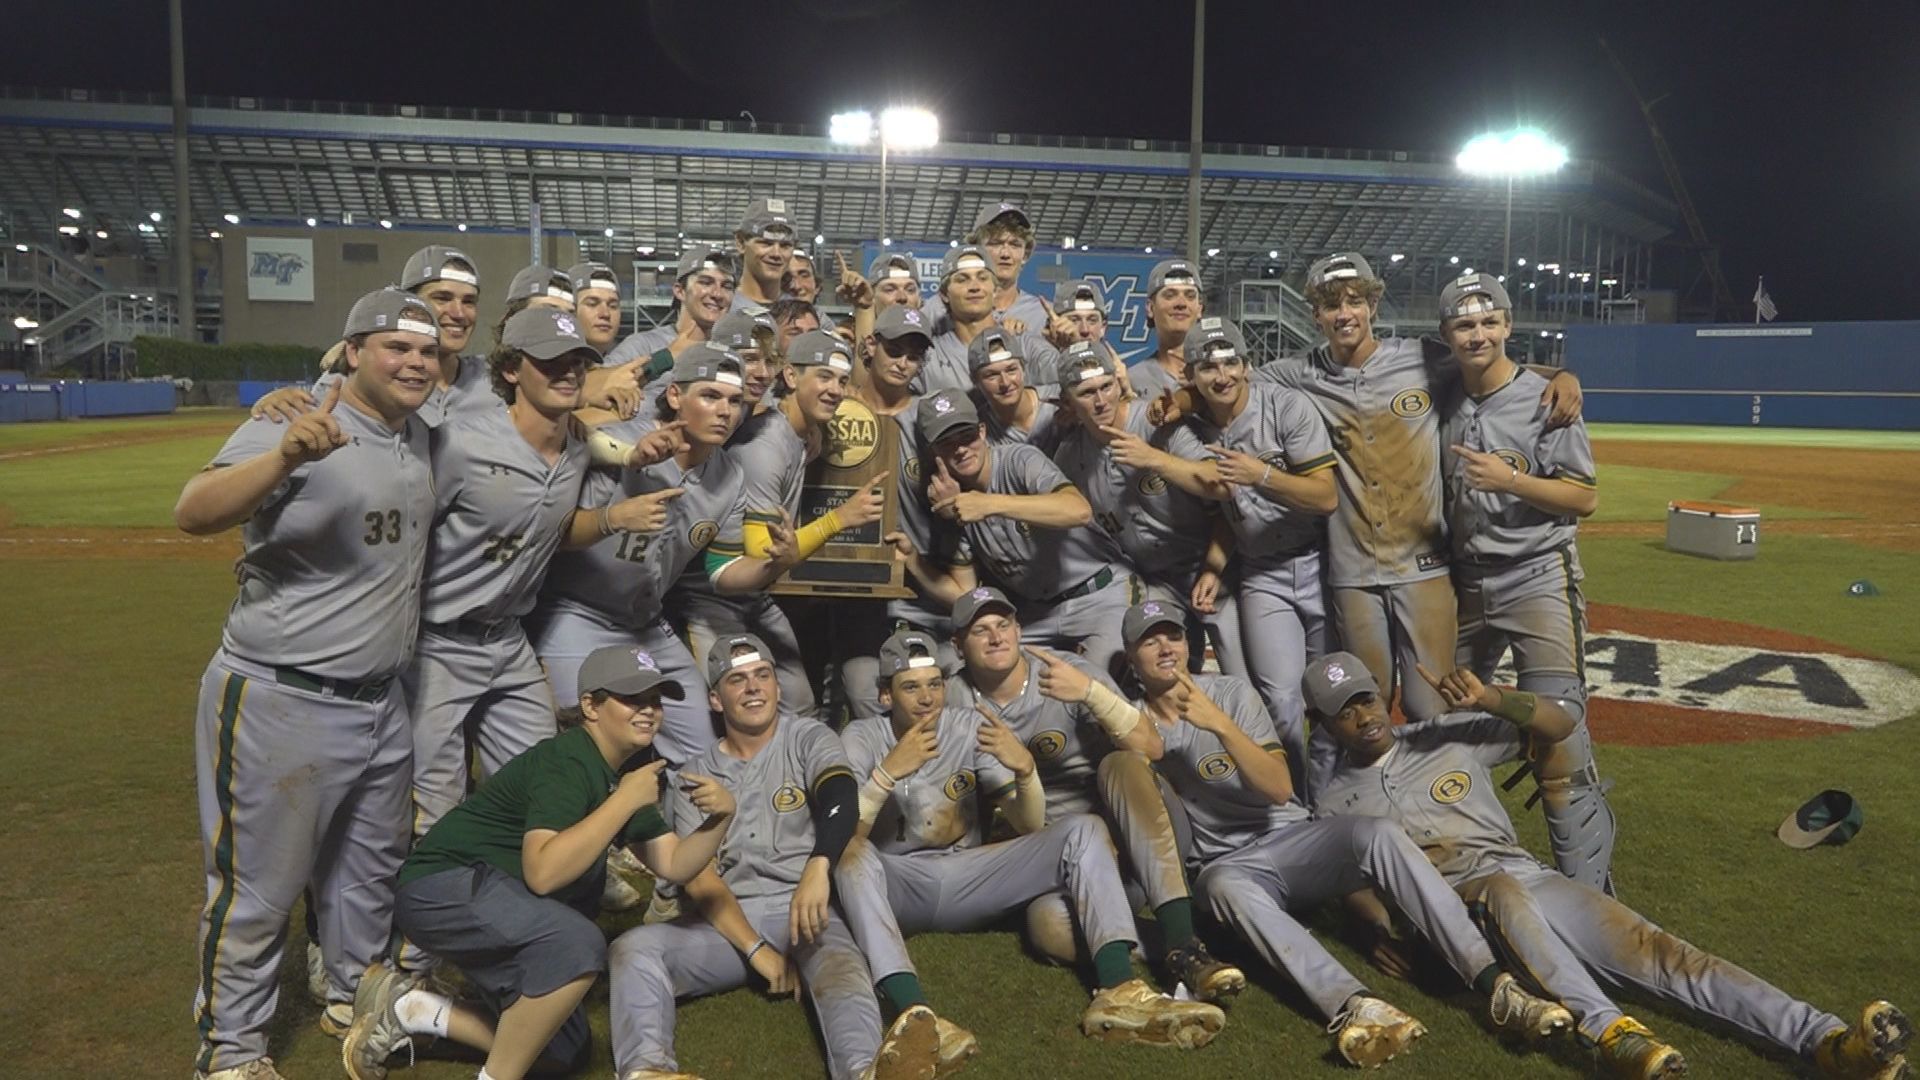 It's a moment no Briarcrest Saint will soon forget: the first state championship in baseball program history.